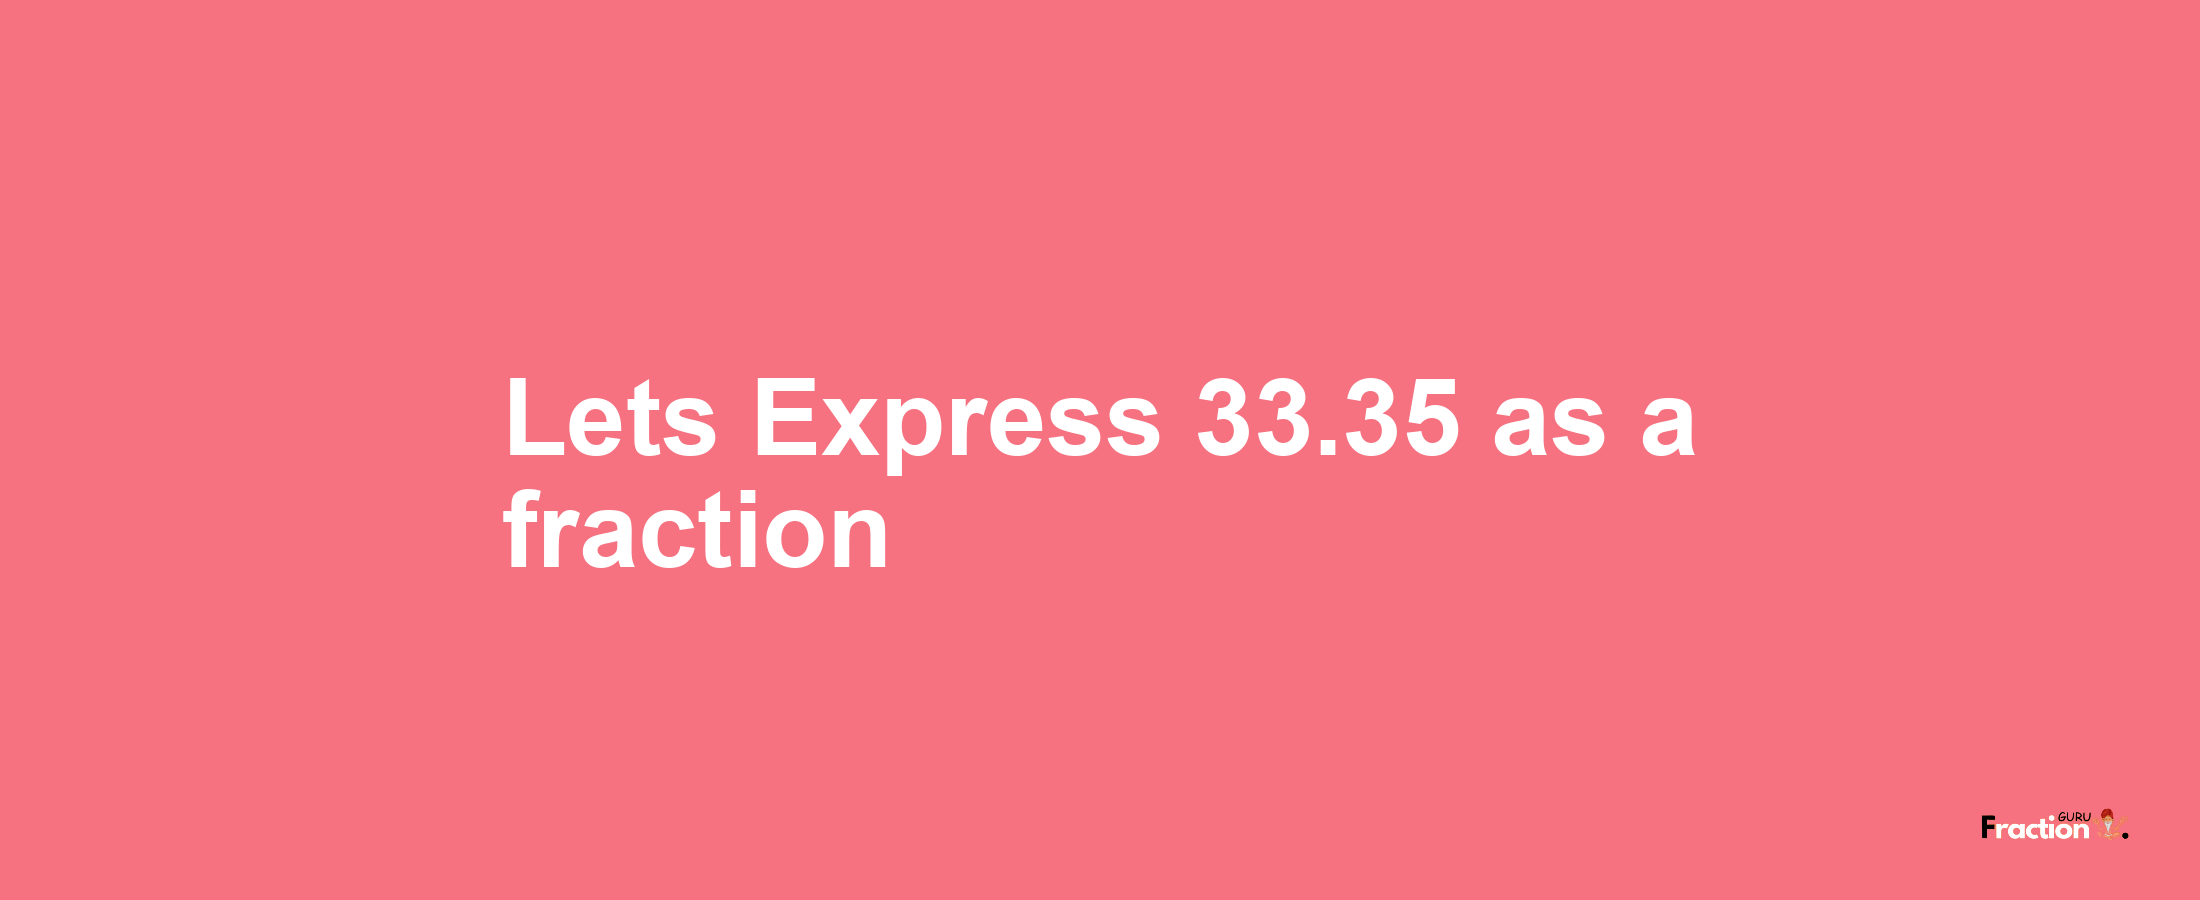 Lets Express 33.35 as afraction